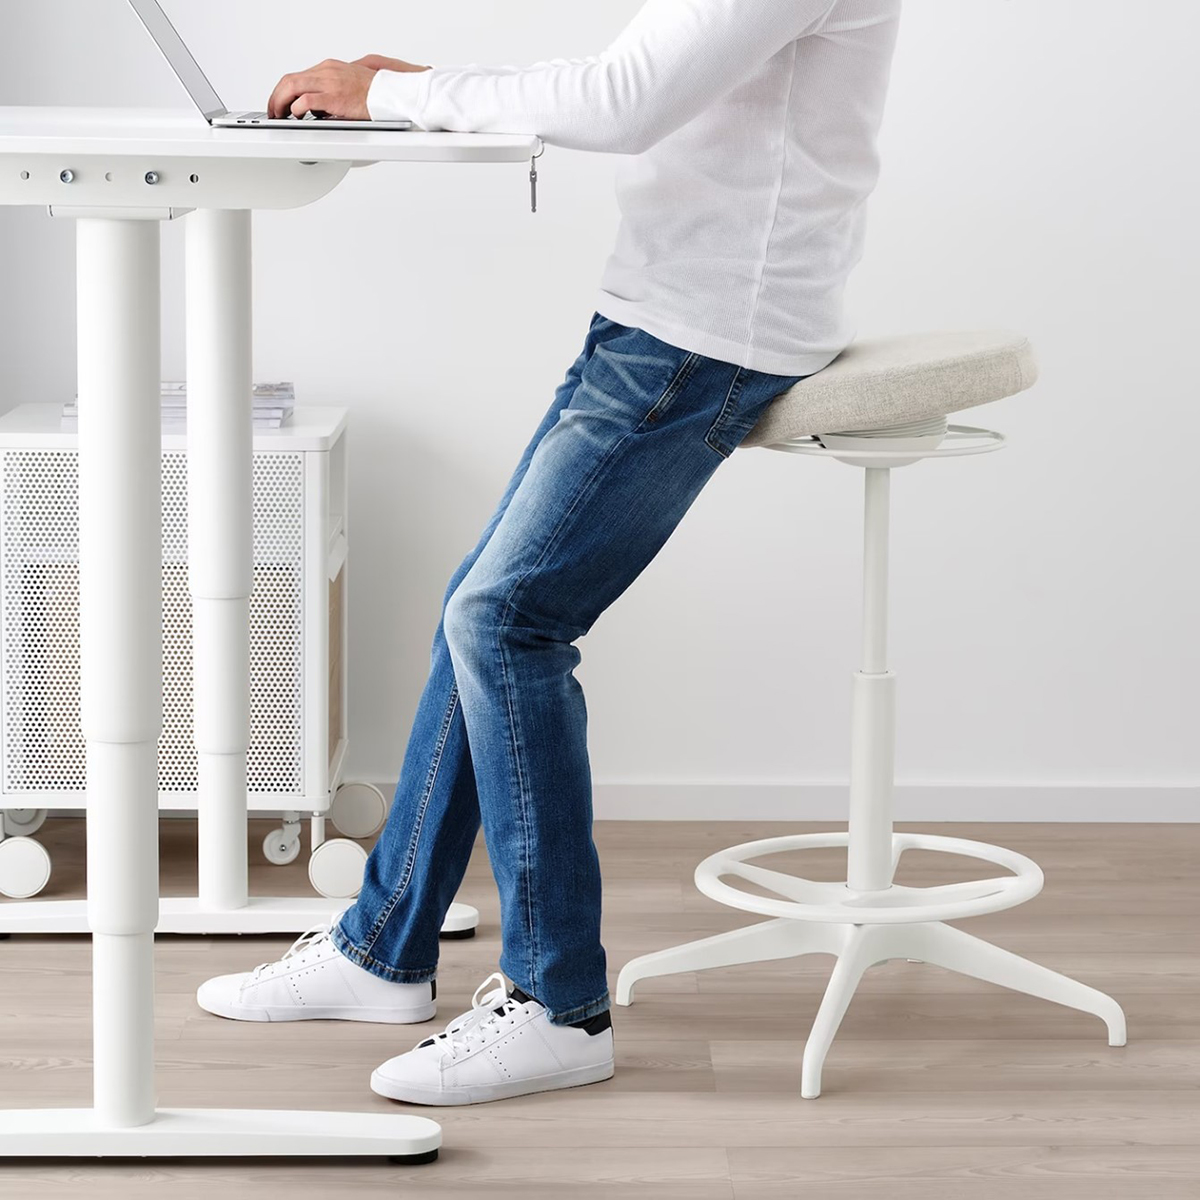 Standing Desk Improve Your Home Office -